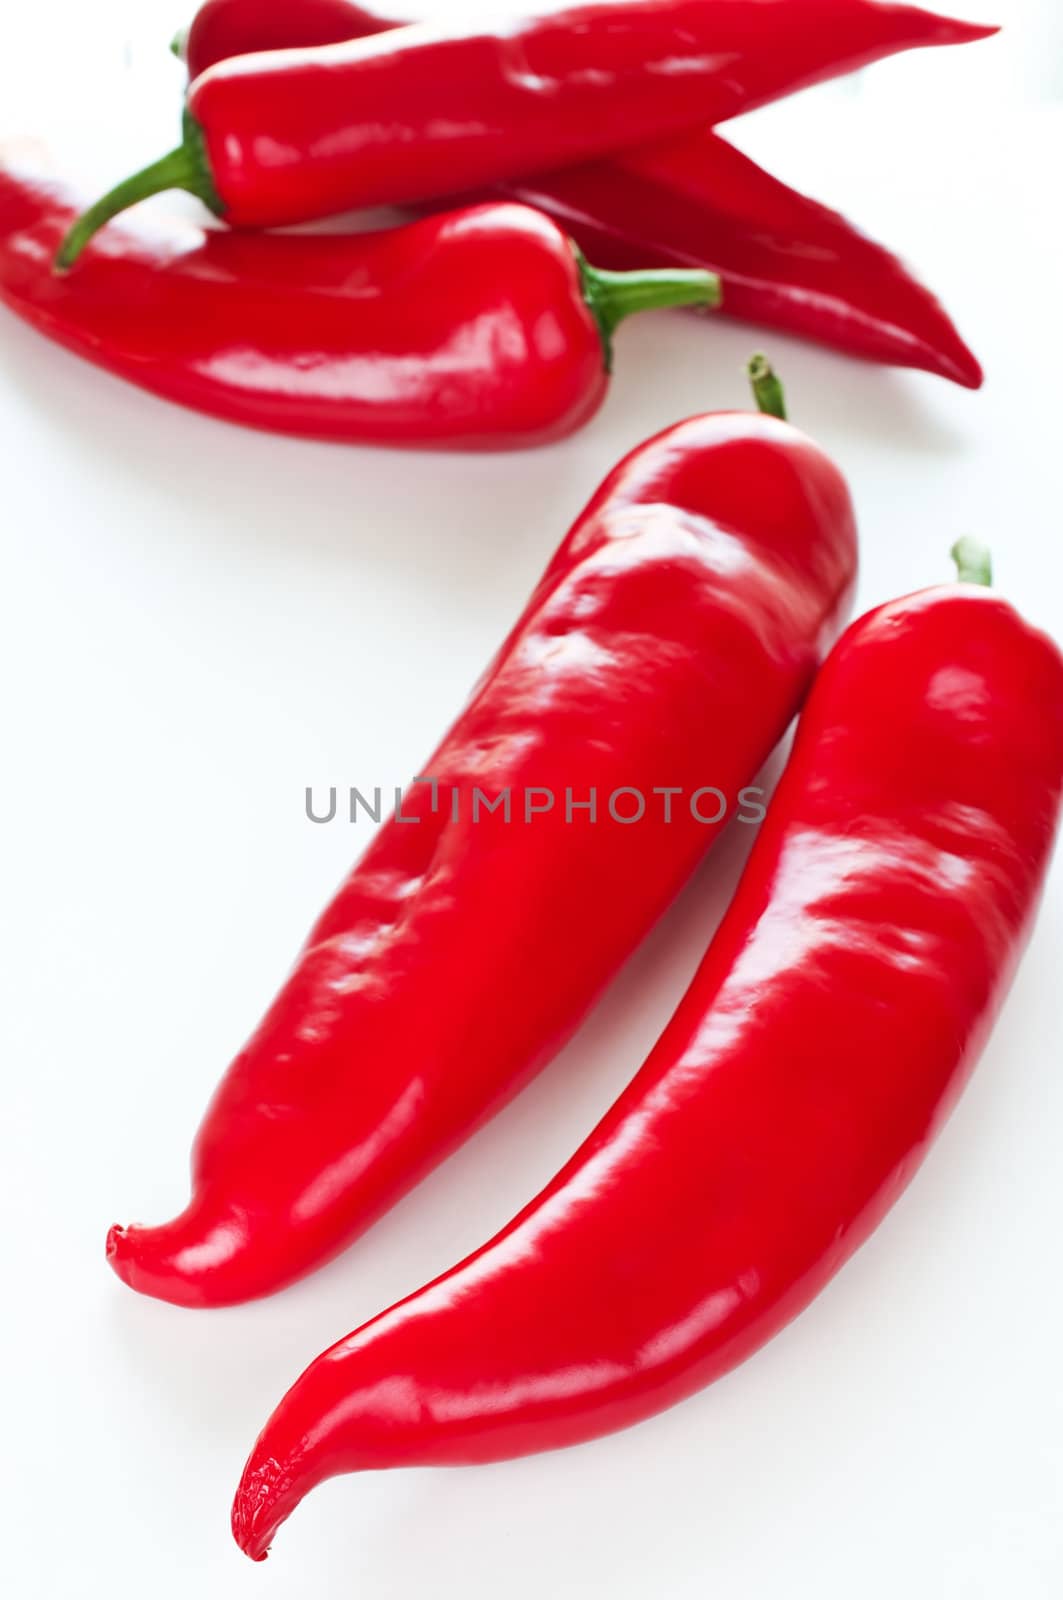 Sweet paprika peppers close up